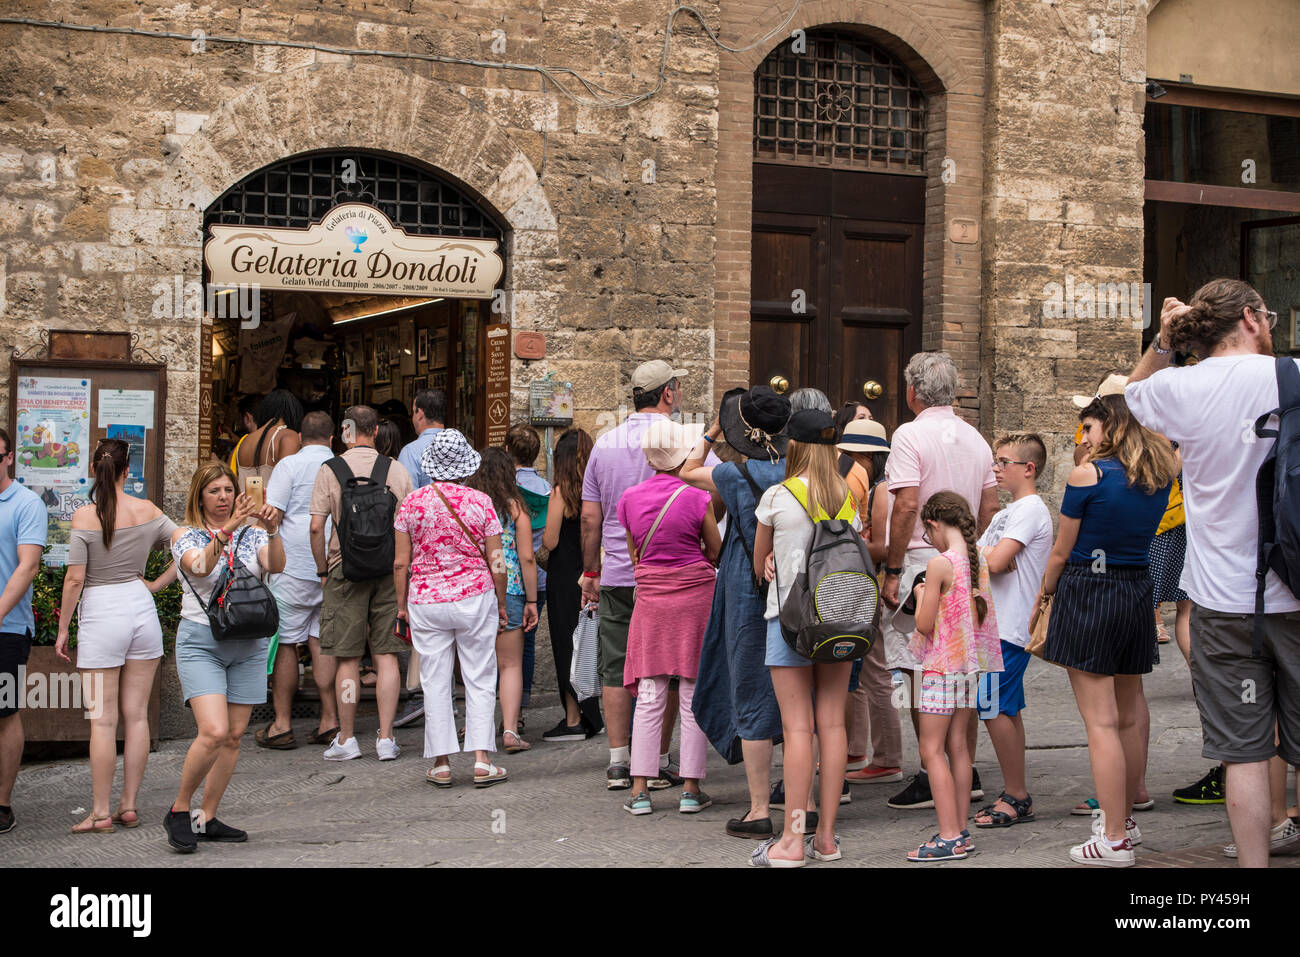 A very long queue for icecream outside of Gelateria Dondoli in hilltop town of San Gimignano, Tuscany, Italy Stock Photo